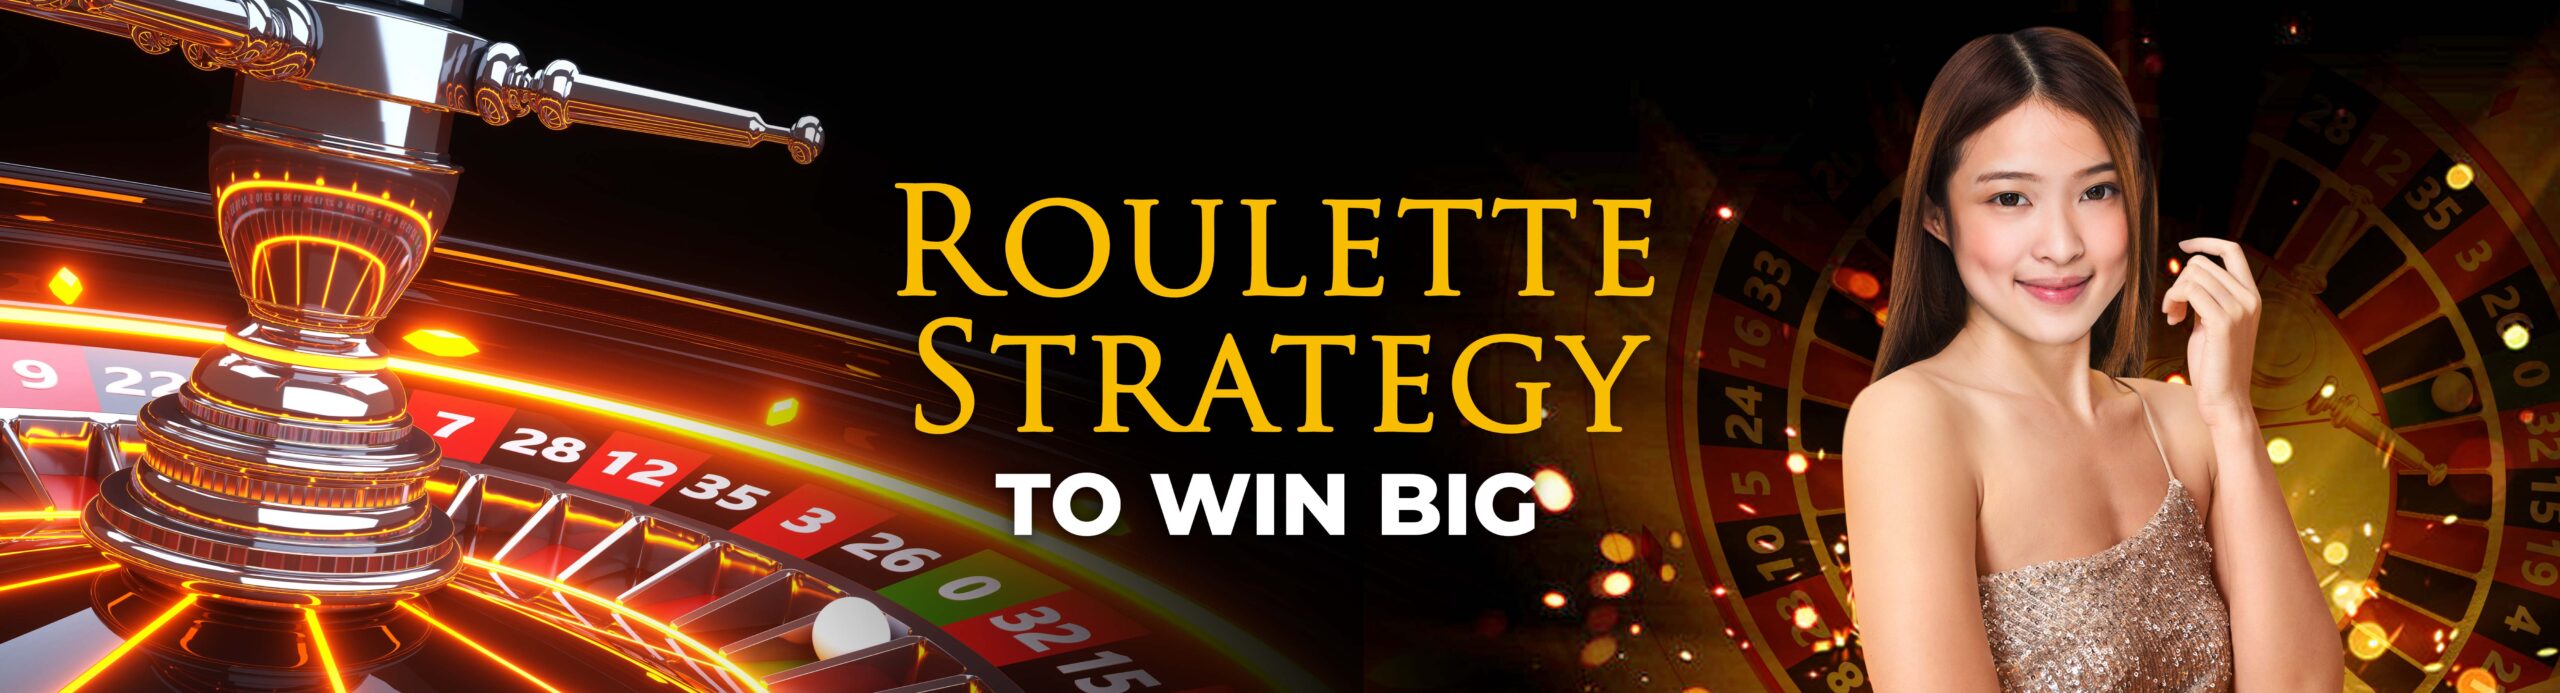 Guide on How to Play Online Roulette - OKBET online casino